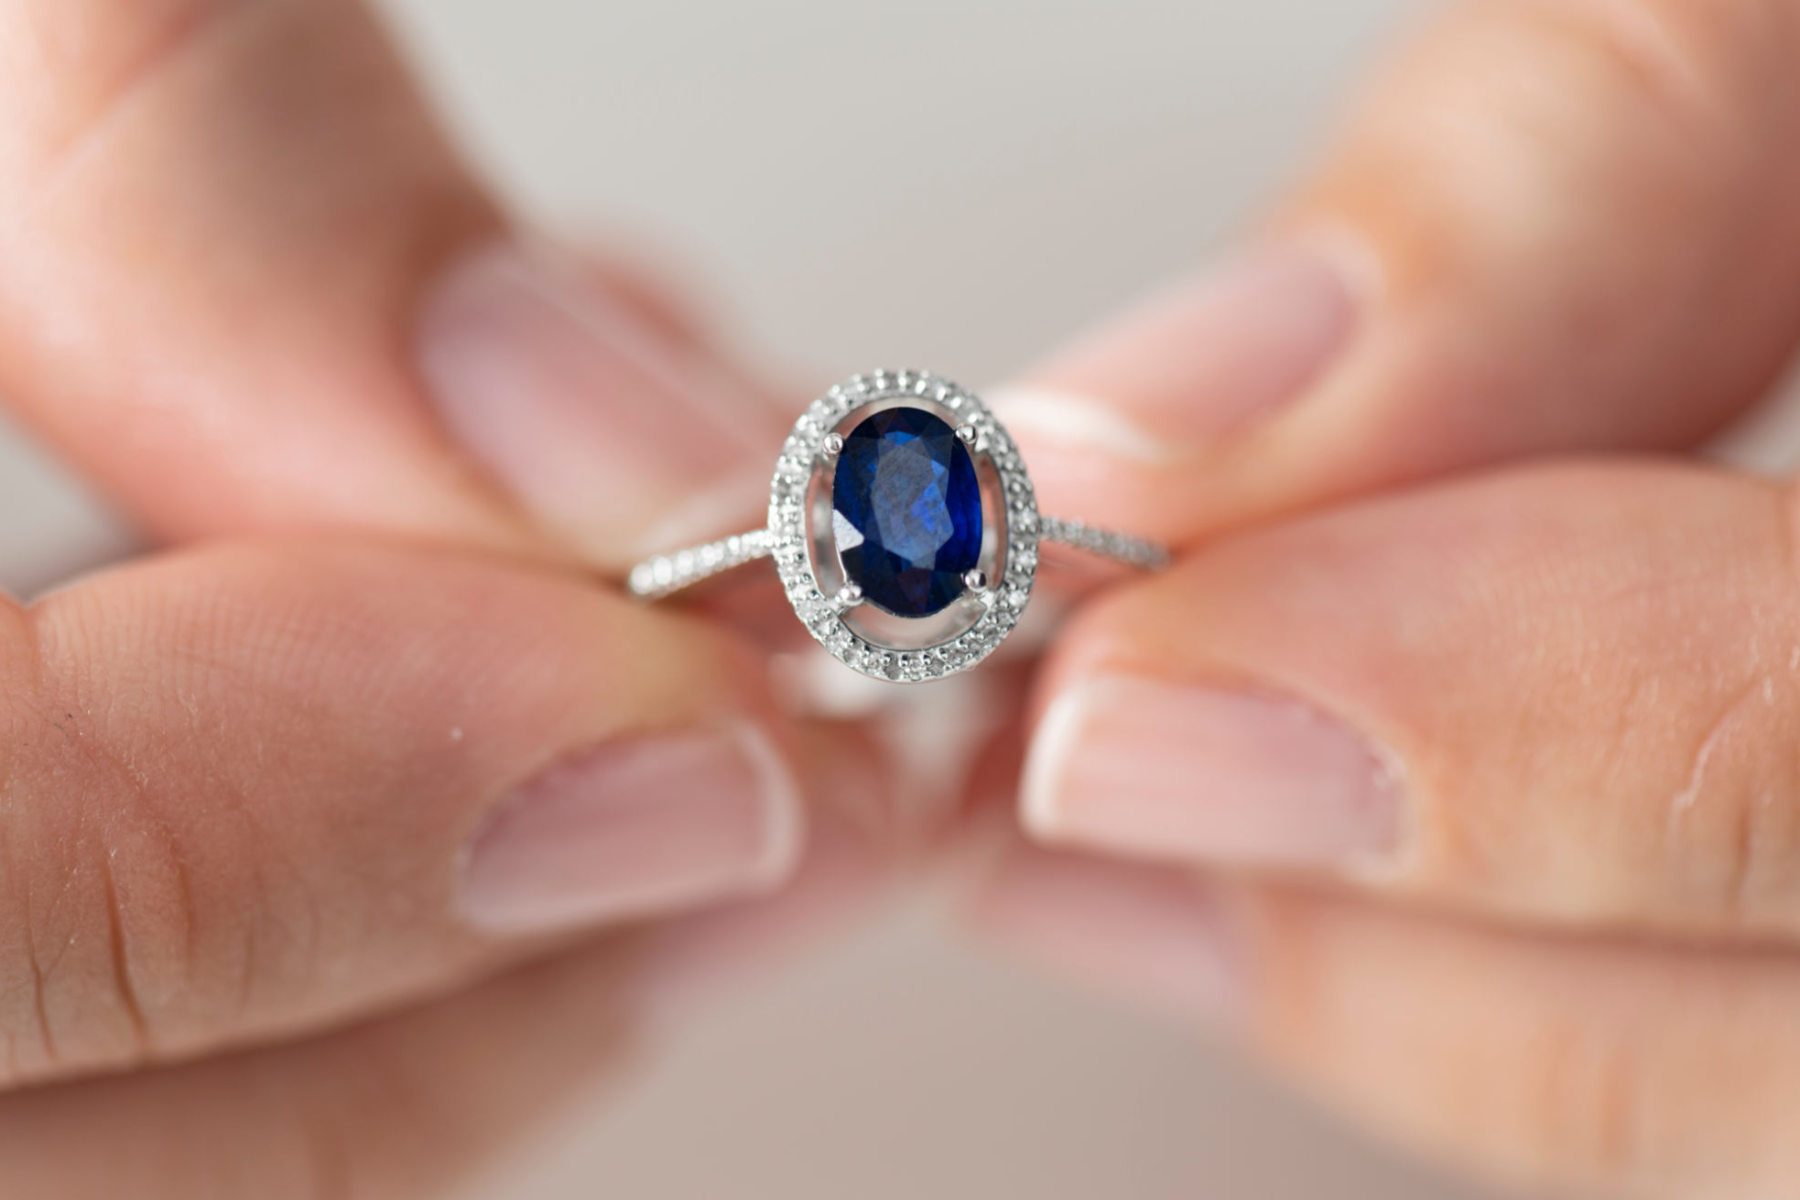 A woman's hand holding a blue sapphire stone ring